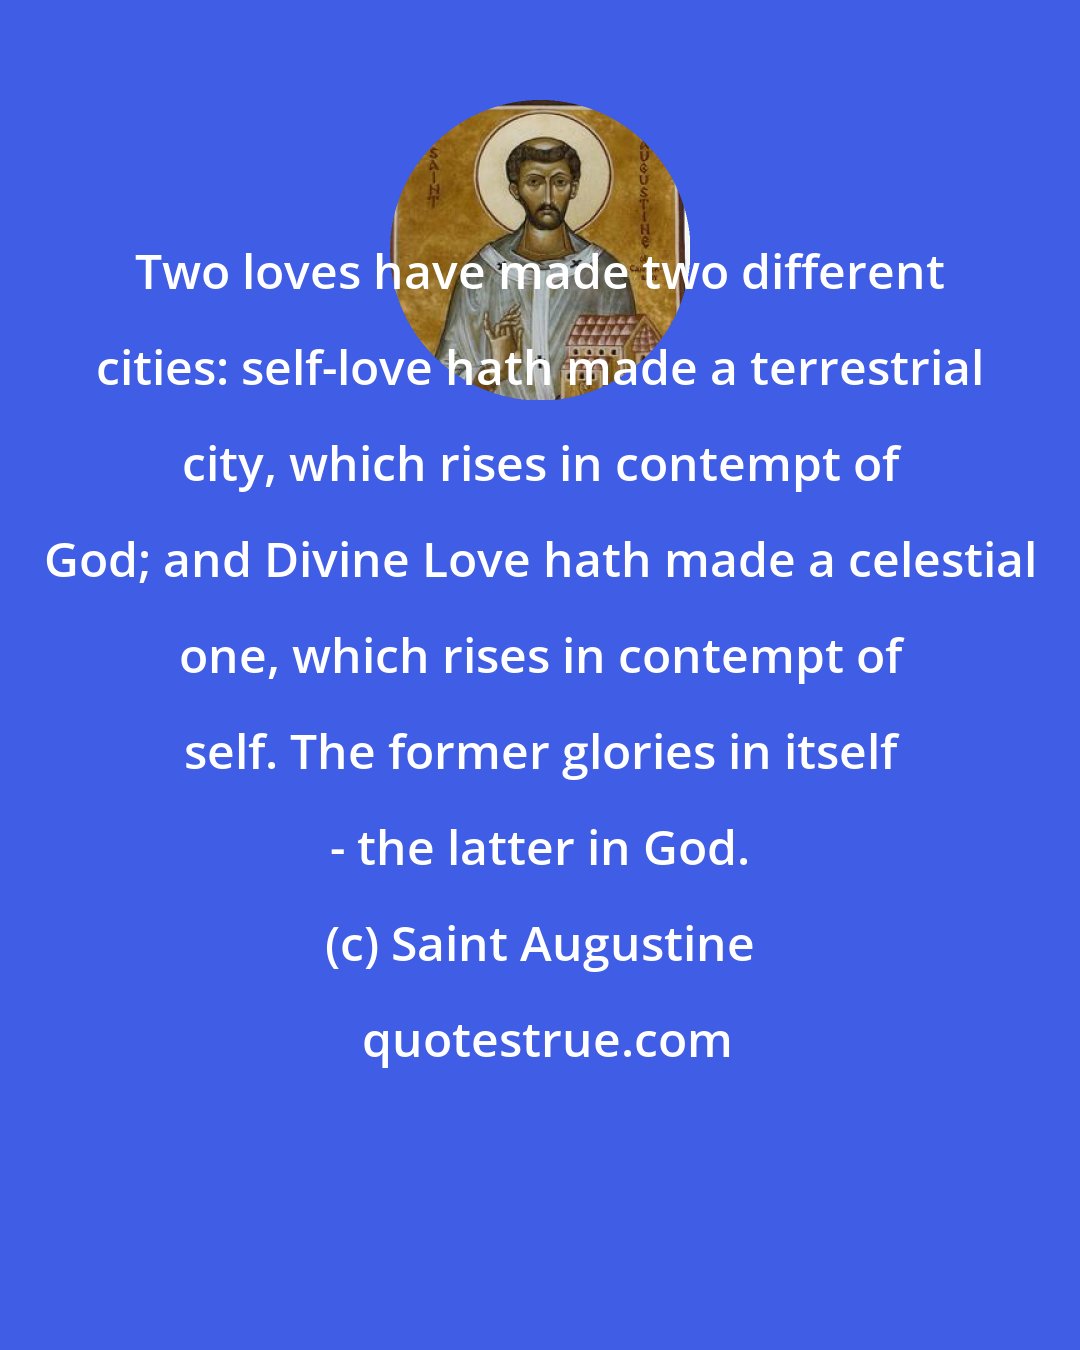 Saint Augustine: Two loves have made two different cities: self-love hath made a terrestrial city, which rises in contempt of God; and Divine Love hath made a celestial one, which rises in contempt of self. The former glories in itself - the latter in God.